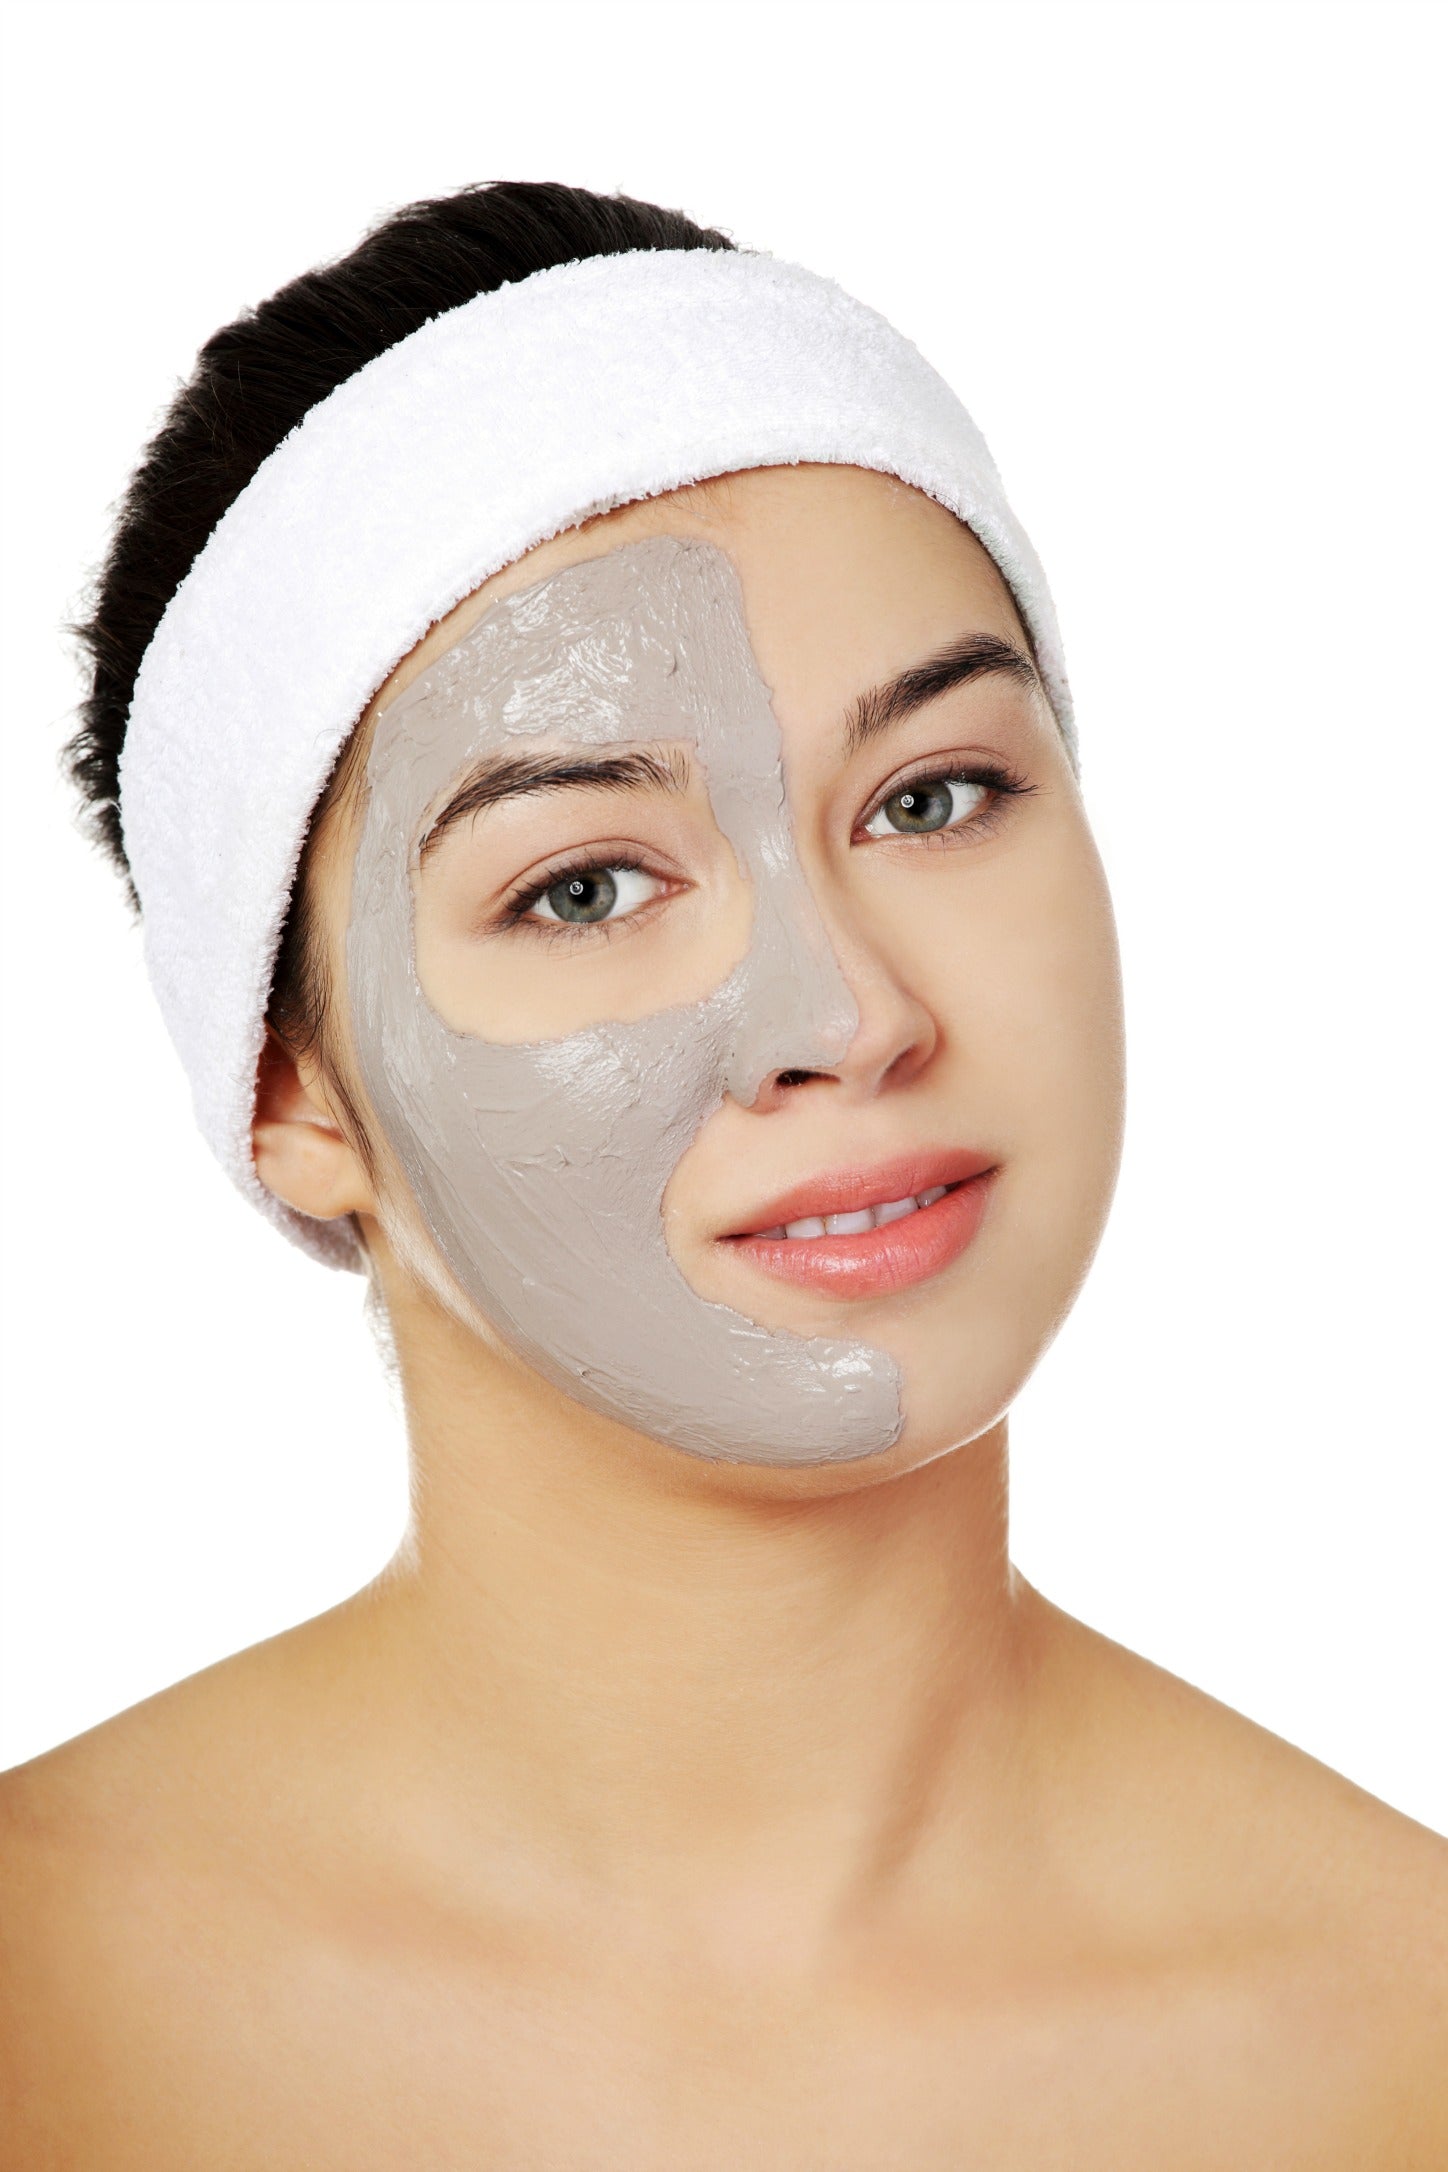 How to Minimize, Prevent, and Treat Enlarged Pores and Blackheads